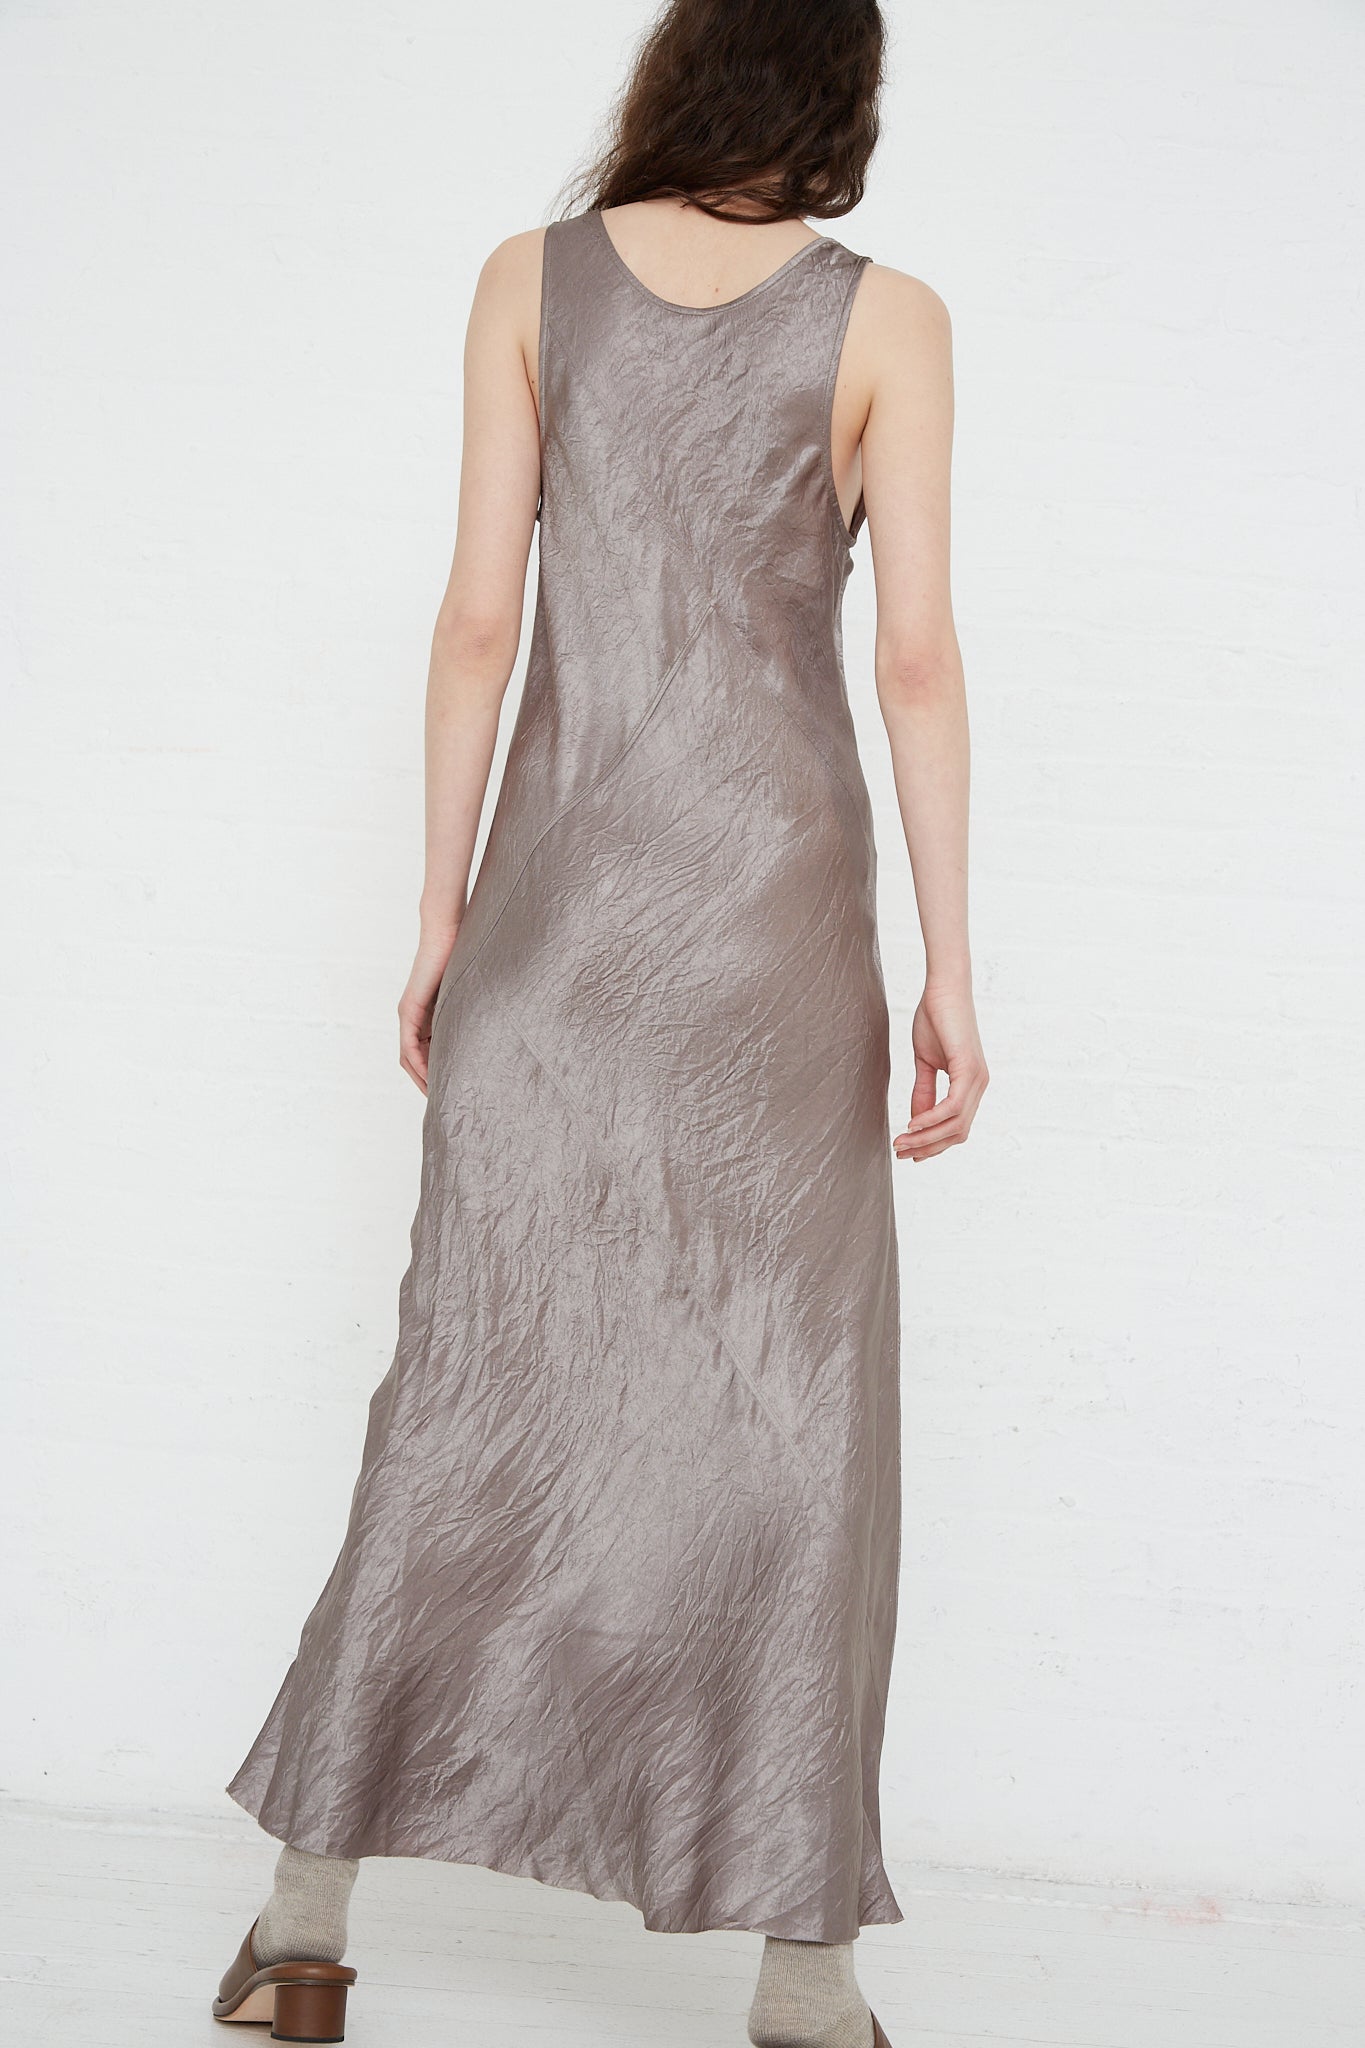 The back view of a woman wearing a Luster Bias Dress in Laurel by Lauren Manoogian.